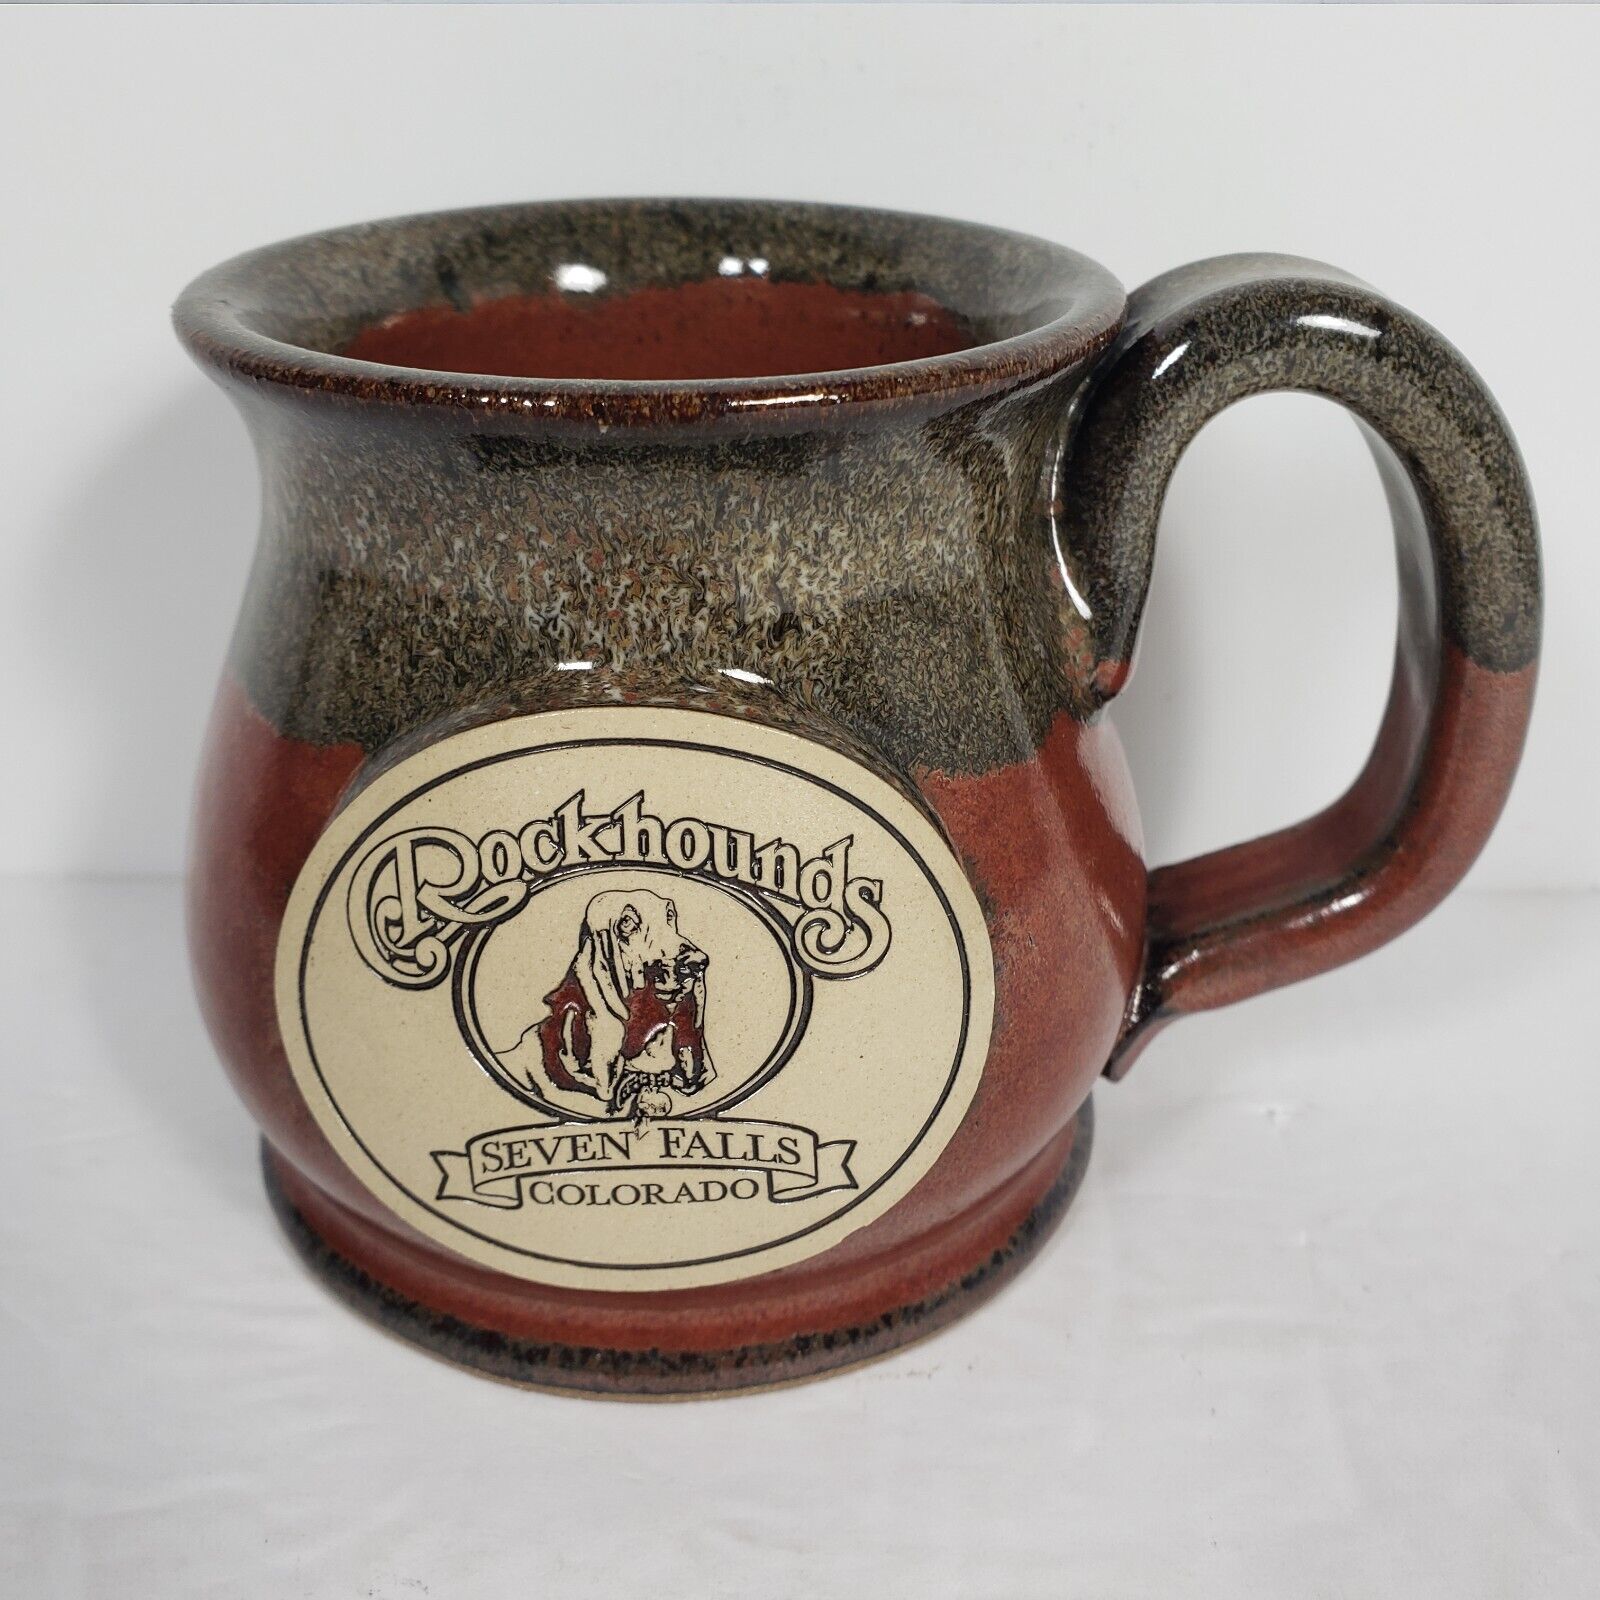 Sunset Hill Stoneware Mug, Rockhounds, Seven Falls, Colorado, Handcrafted in USA